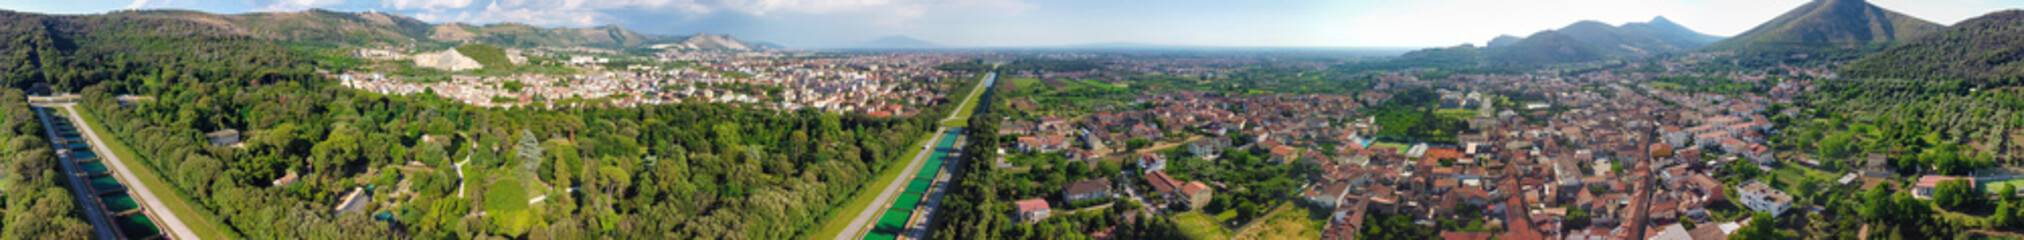 Fototapeta na wymiar Reggia di Caserta, Italy. Aerial view of famous royal building gardens from a drone in summer season.